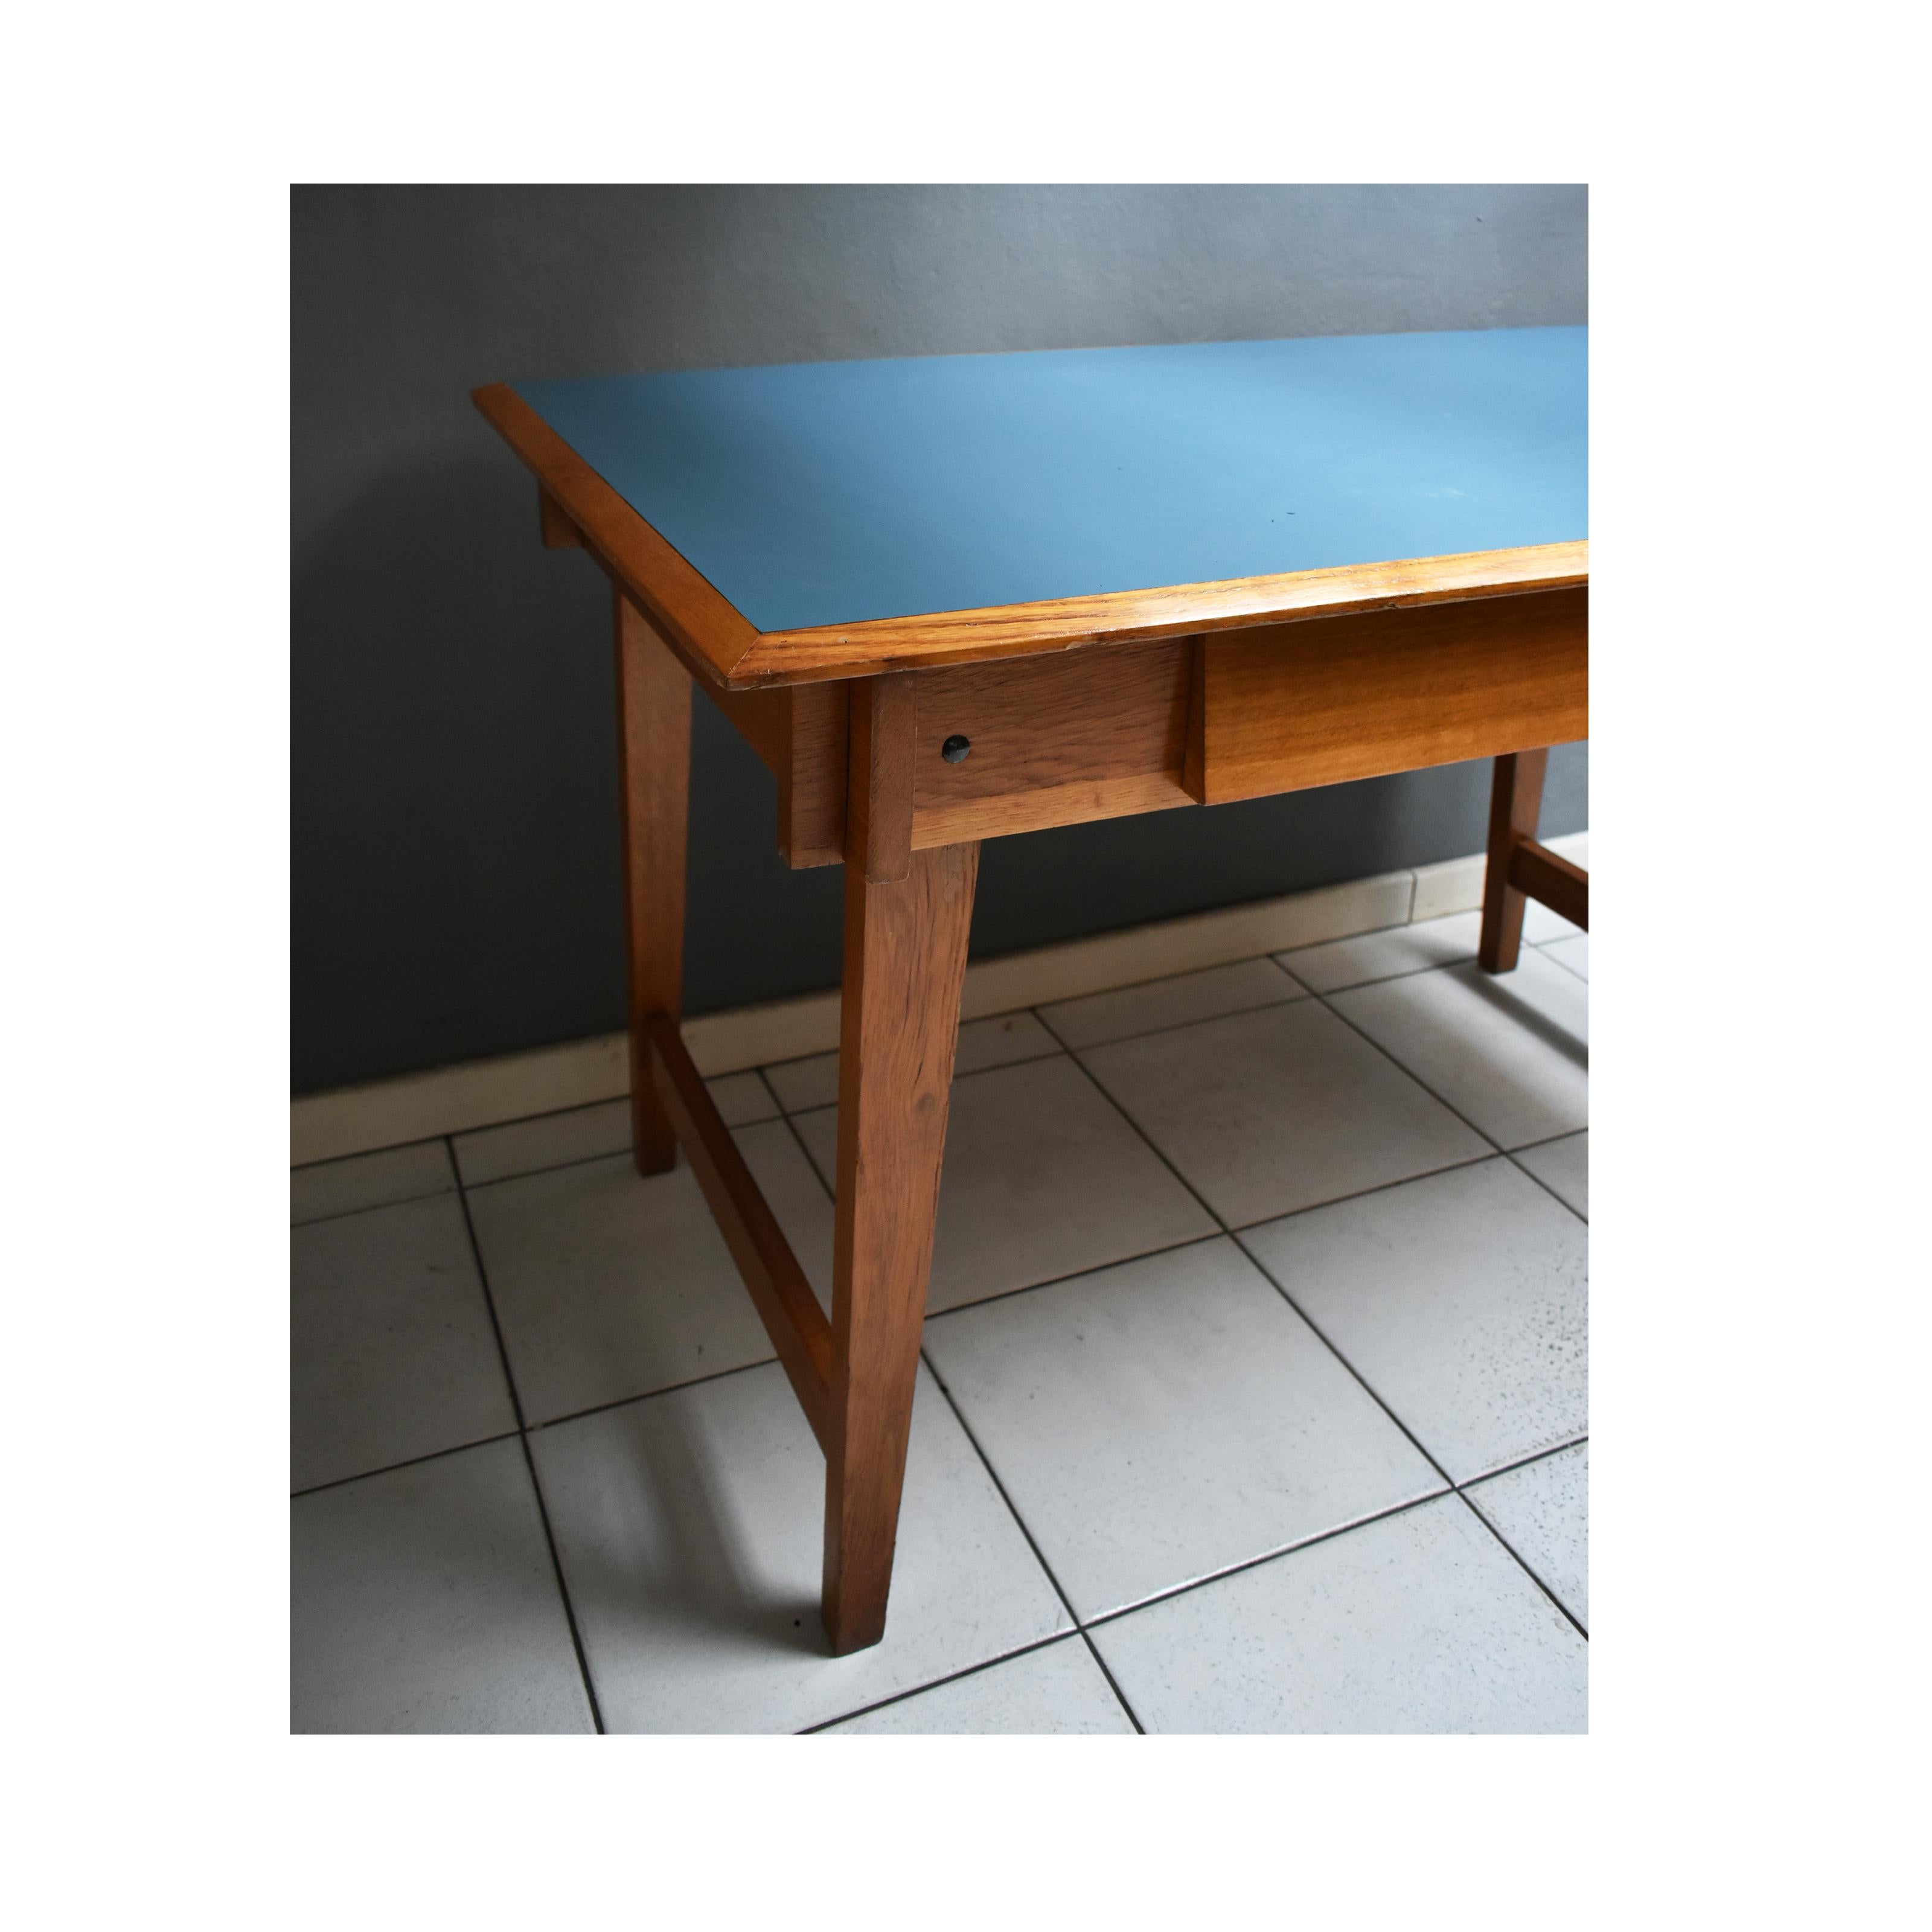 Mid-20th Century  Italian Manufacture, 1960 writing desk in Wood and Light Blue Formica Top